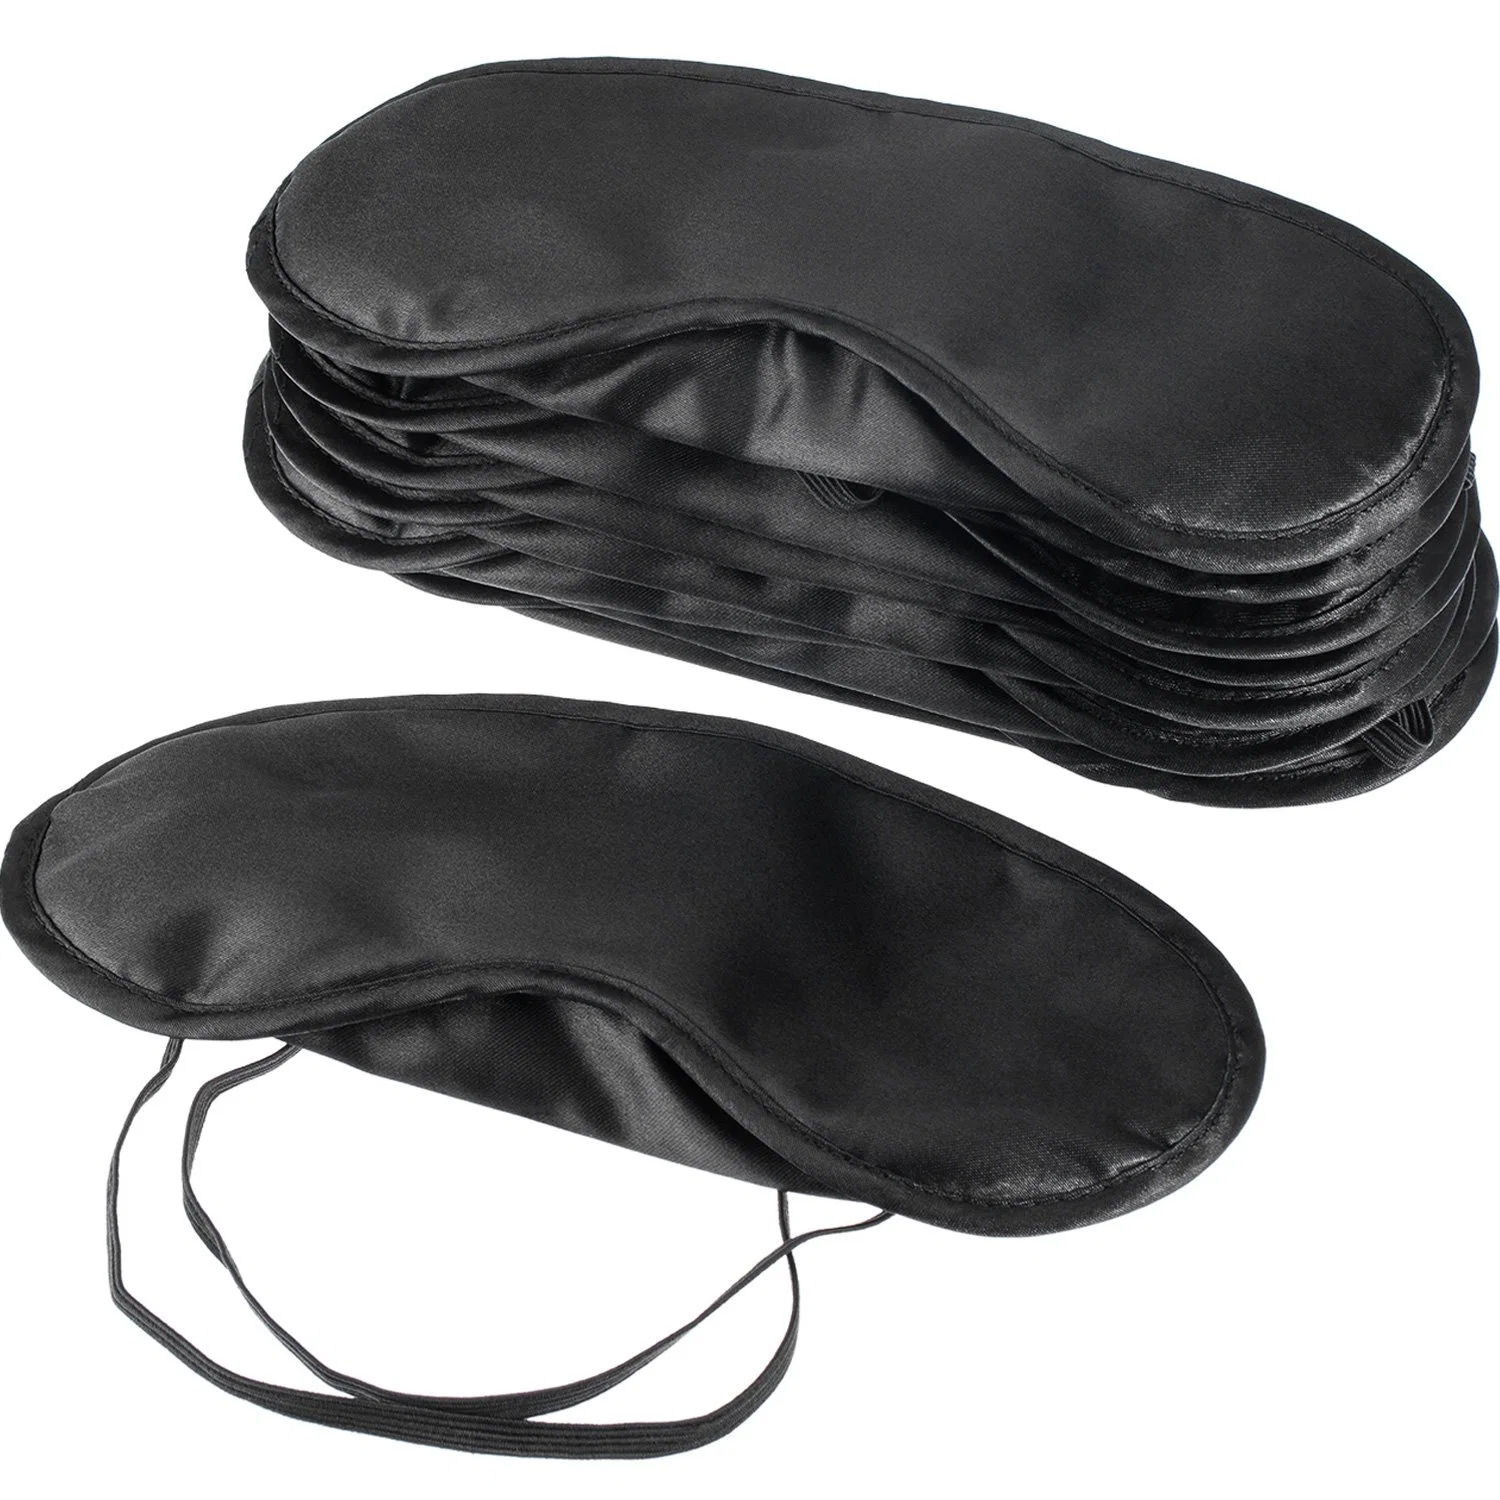 Wholesale/Supplier Custom High quality/High cost performance 10 Pack Mudder Blindfold Eye Mask Shade Cover for Sleeping with Nose Pad